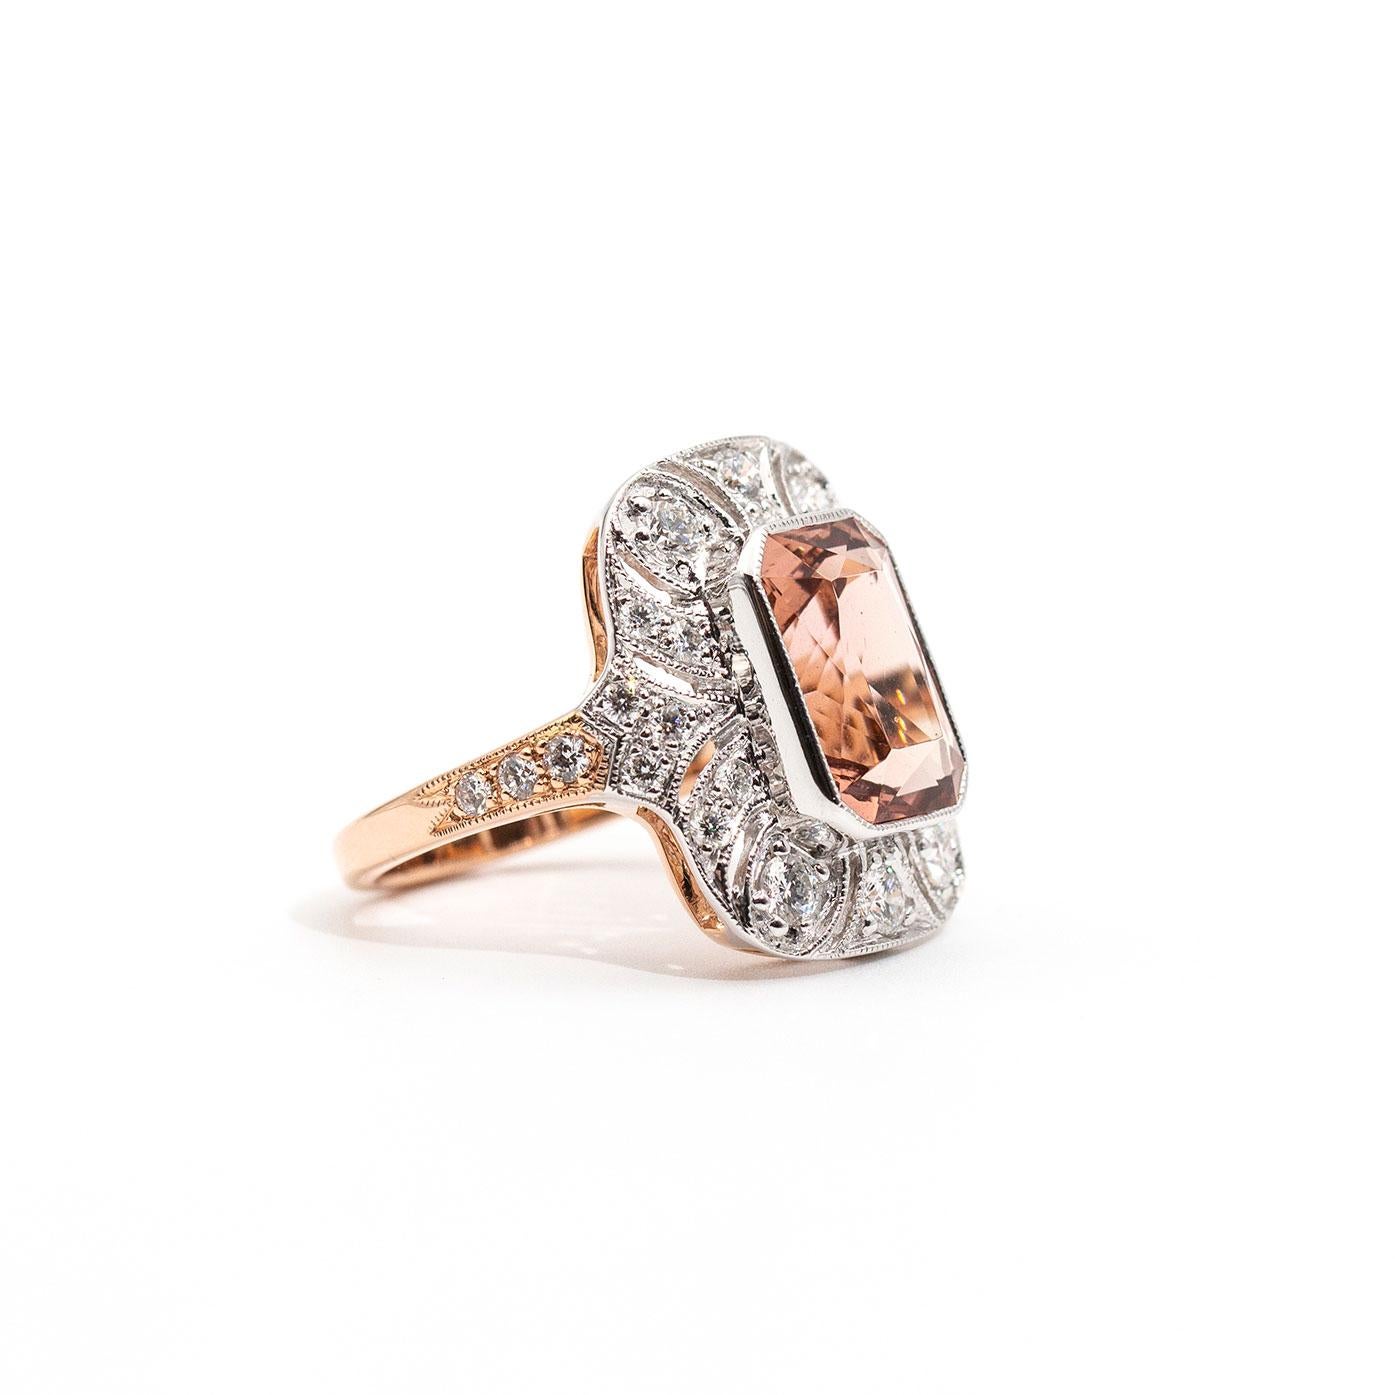 Forged in 18 carat rose and white gold, this captivating vintage-inspired ring features a gorgeous 5.02 carat bright salmon colour modified radiant cut natural morganite. This stunning centrepiece is surrounded by an intricately pierced border set